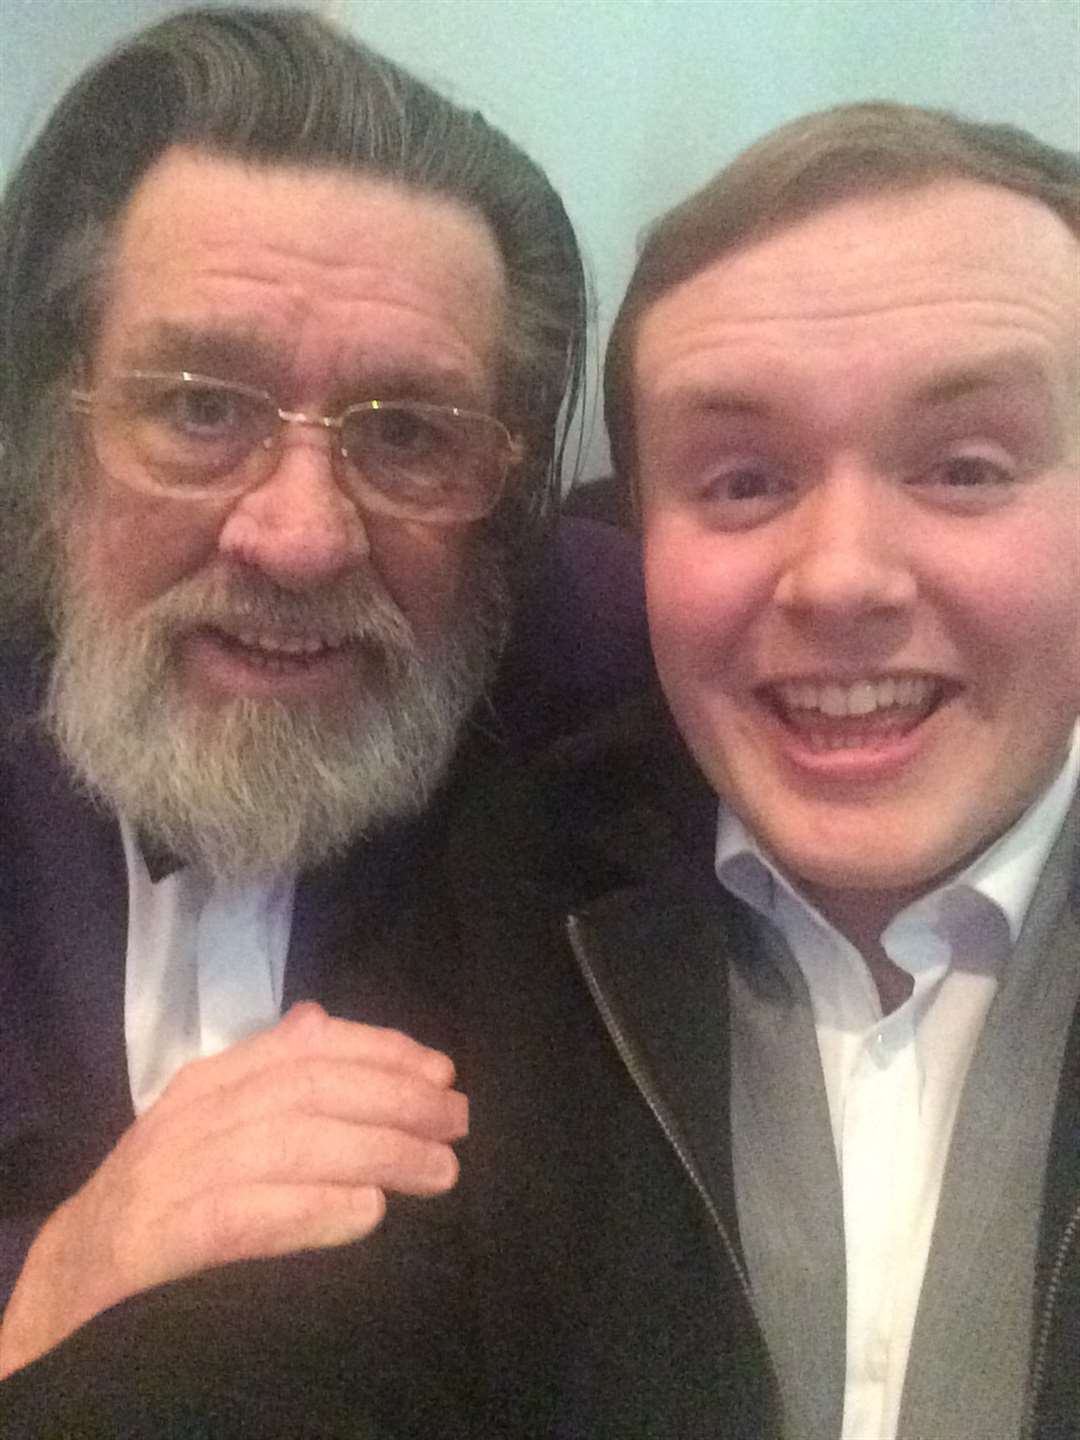 Perry with Ricky Tomlinson